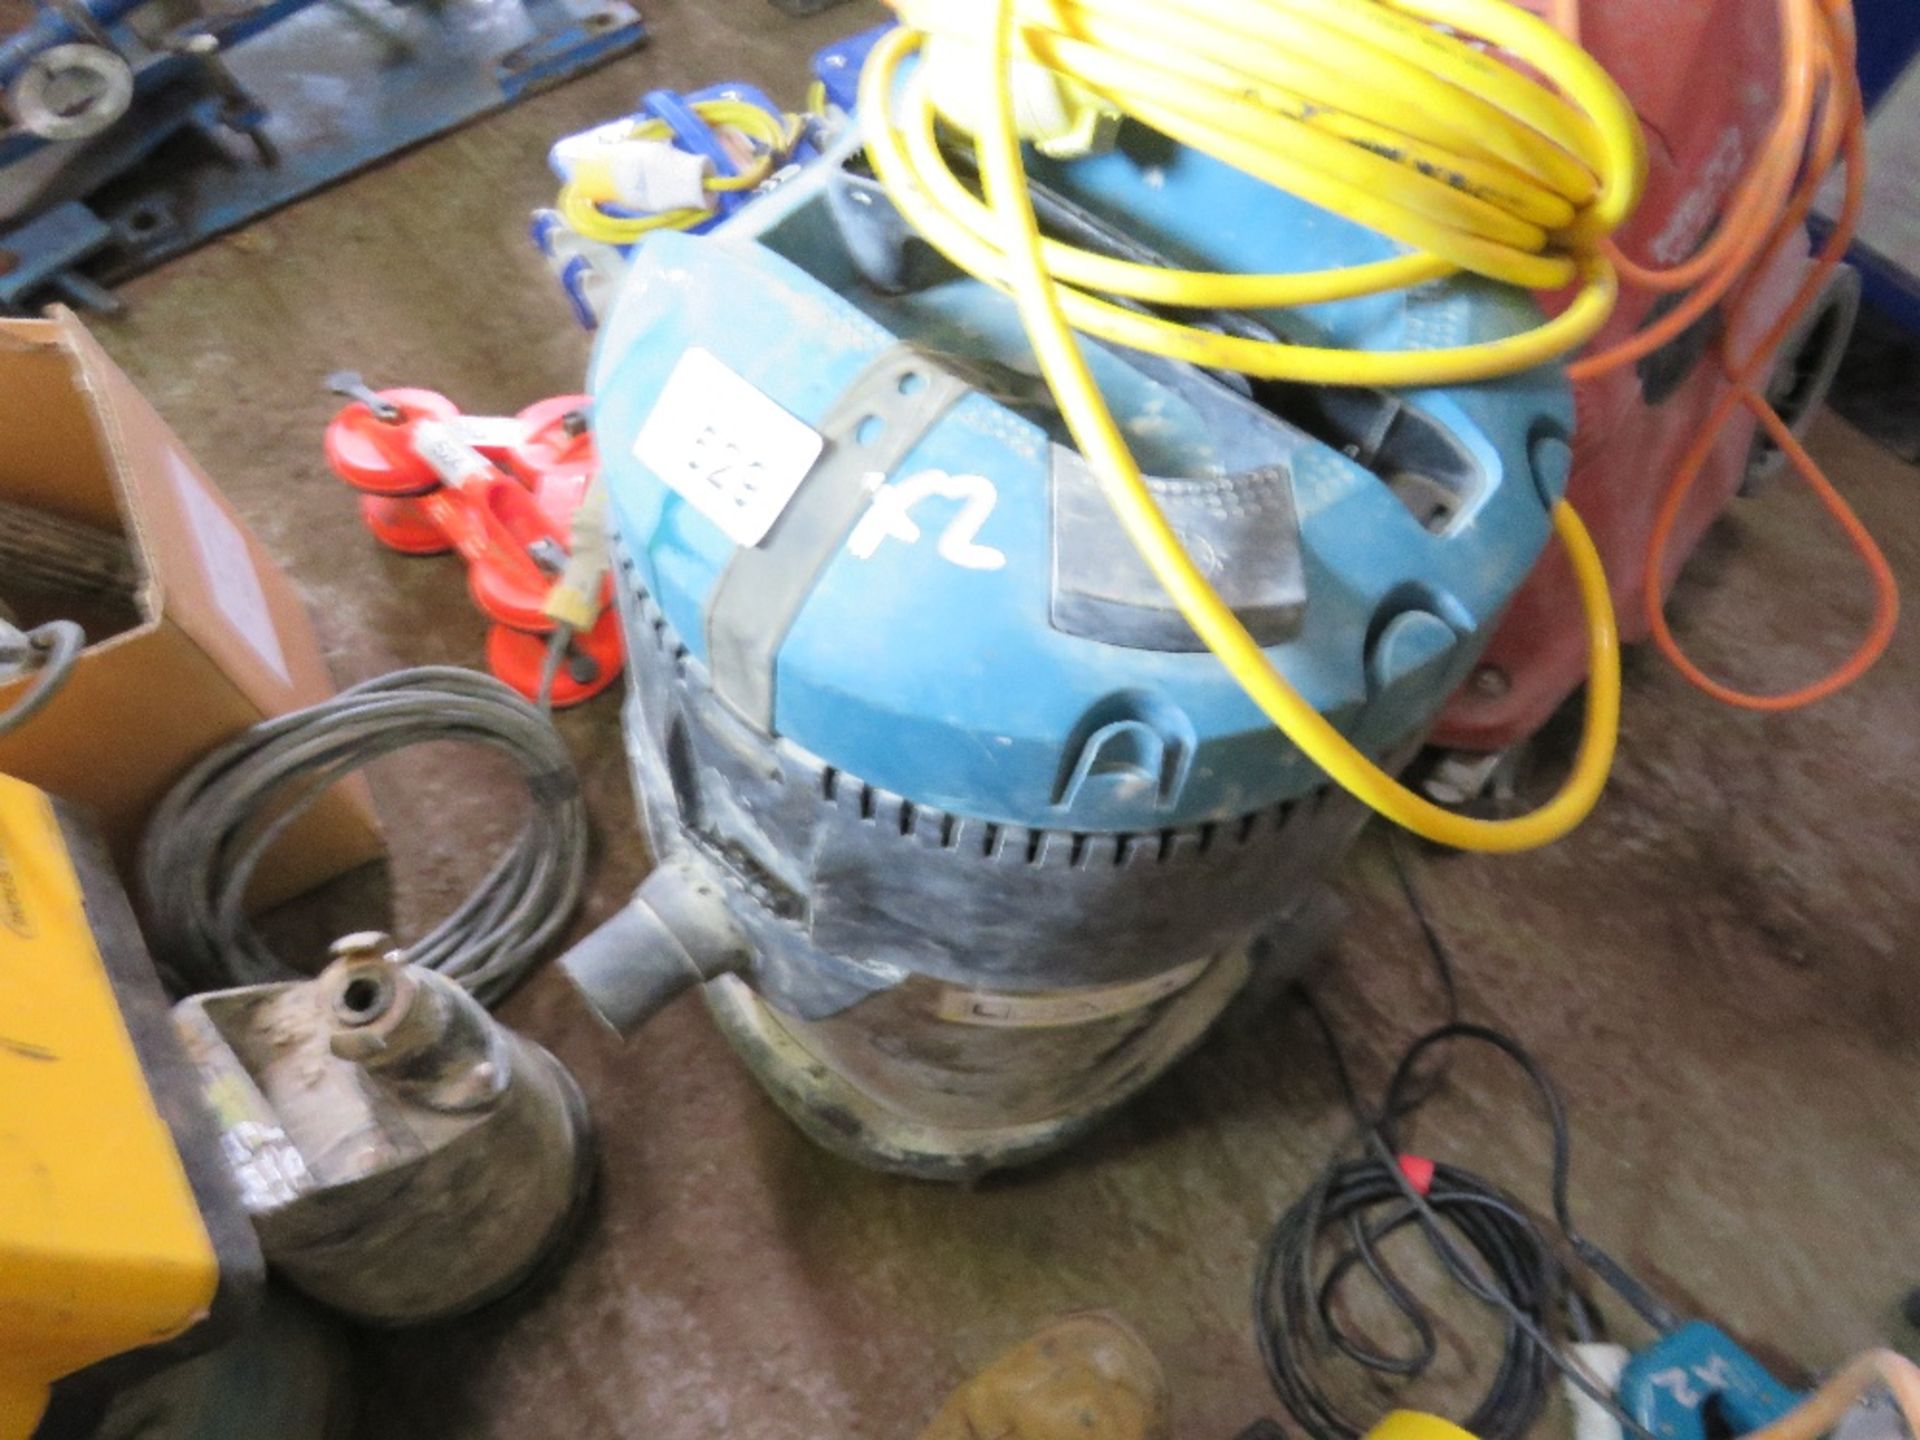 2 X VACUUM UNITS. UNTESTED, CONDITION UNKNOWN. - Image 3 of 3